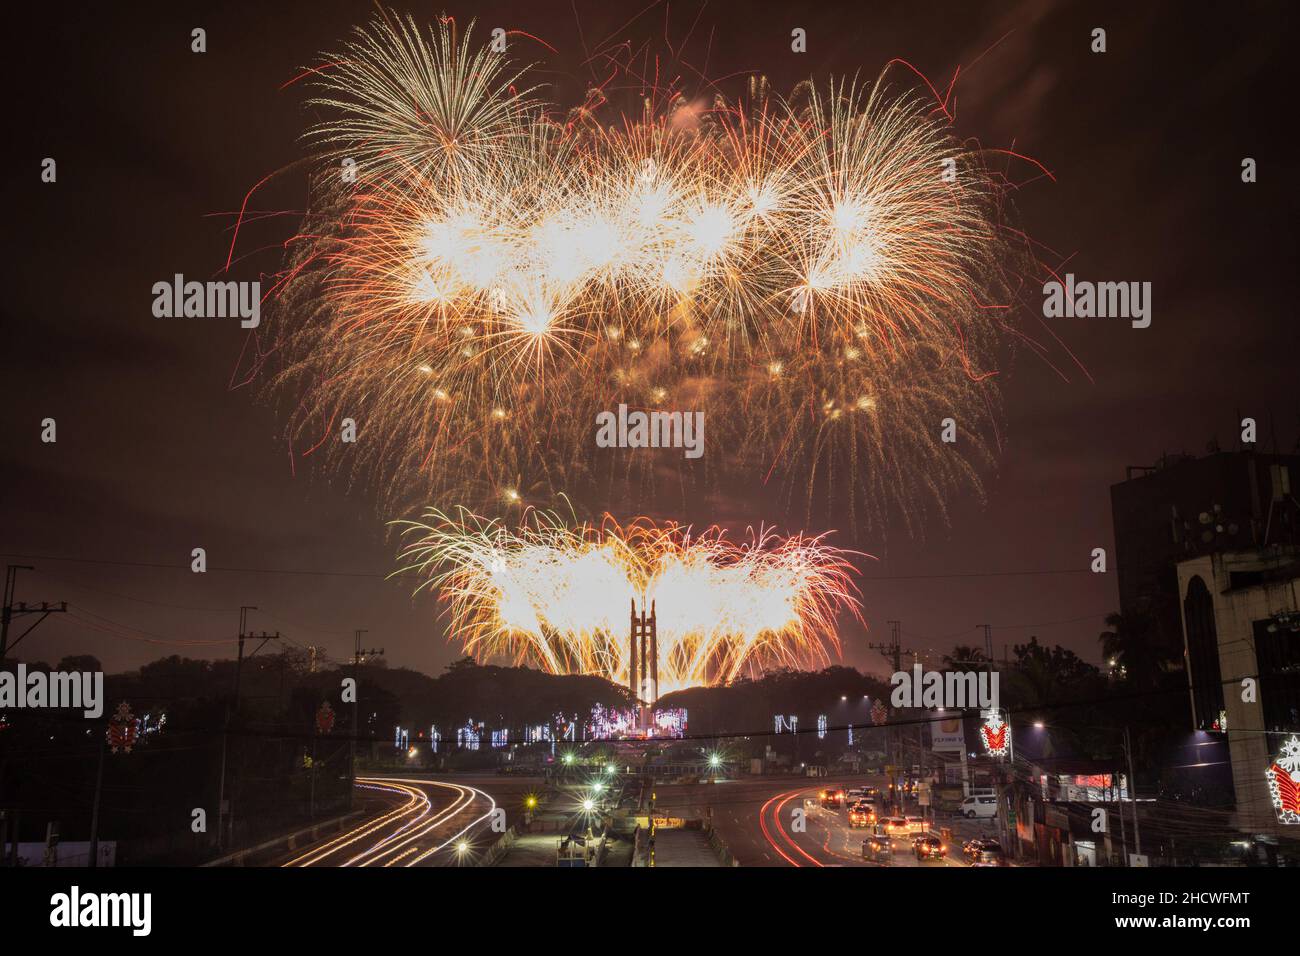 Manila, Philippines. January 1st, 2022. A fireworks display lights up the sky over the Quezon City Memorial Circle to usher in the New Year. Stock Photo